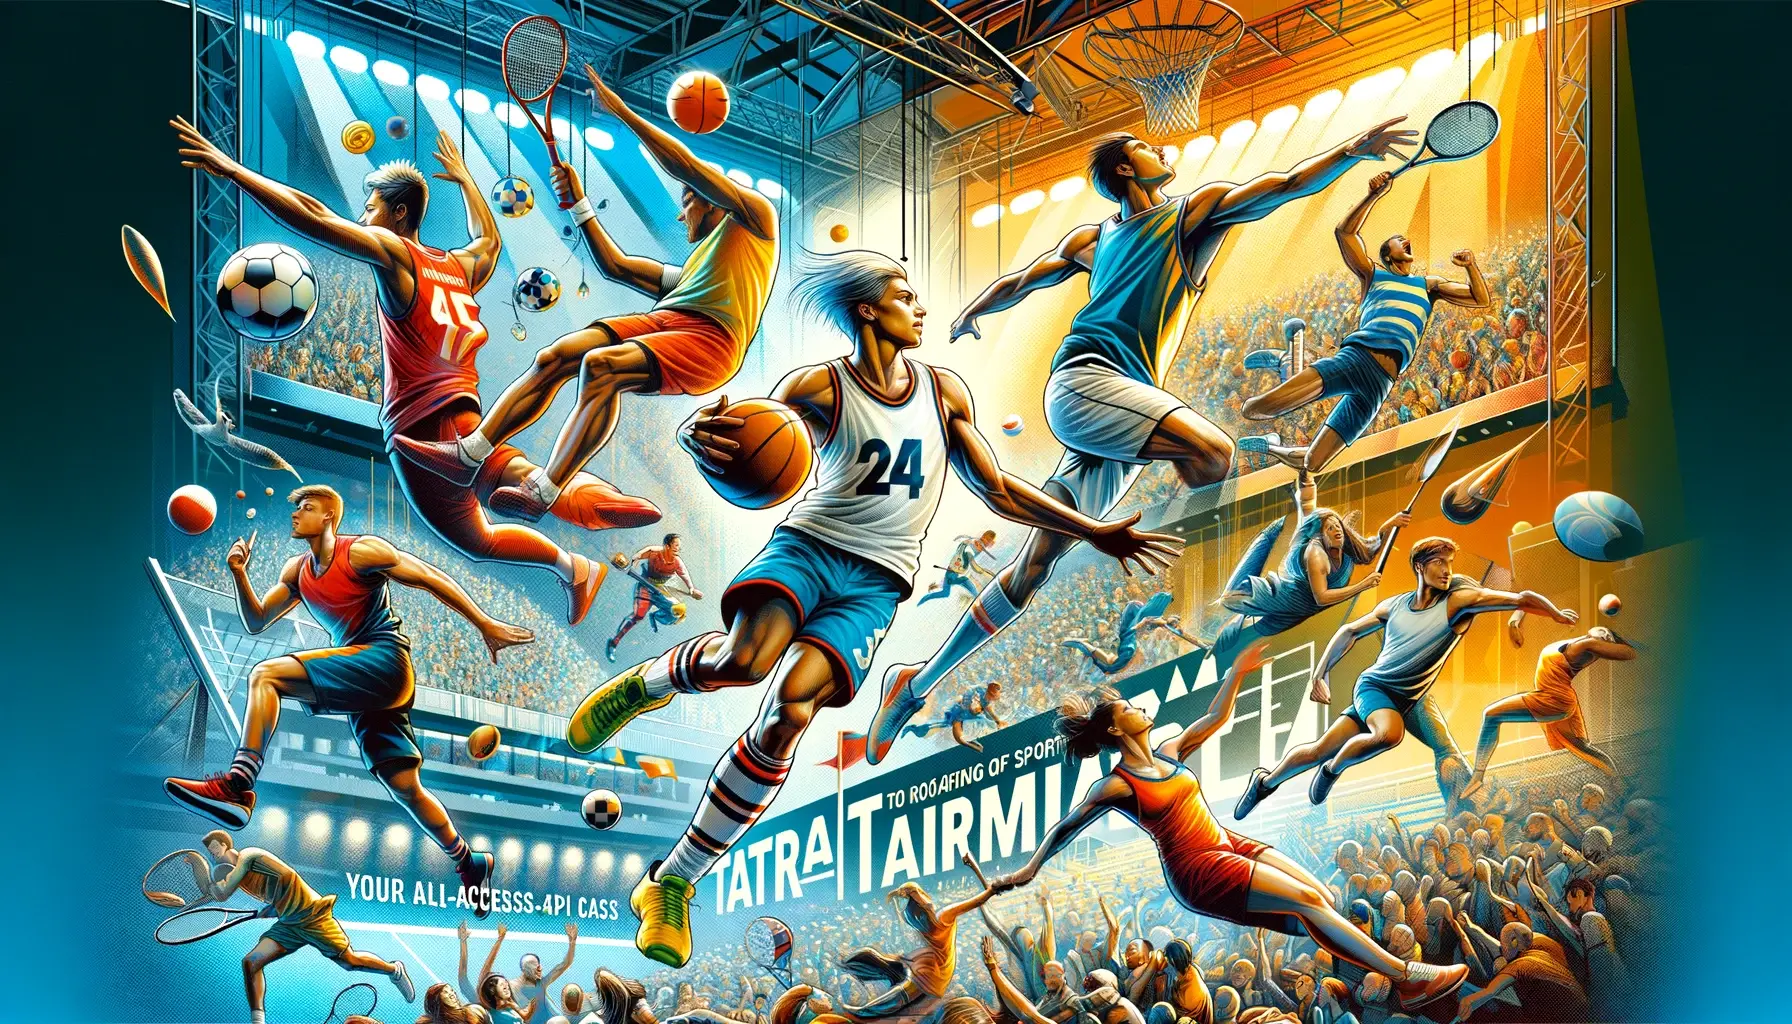 Taraftarium24: Your All-Access Pass to the Roaring World of Sports